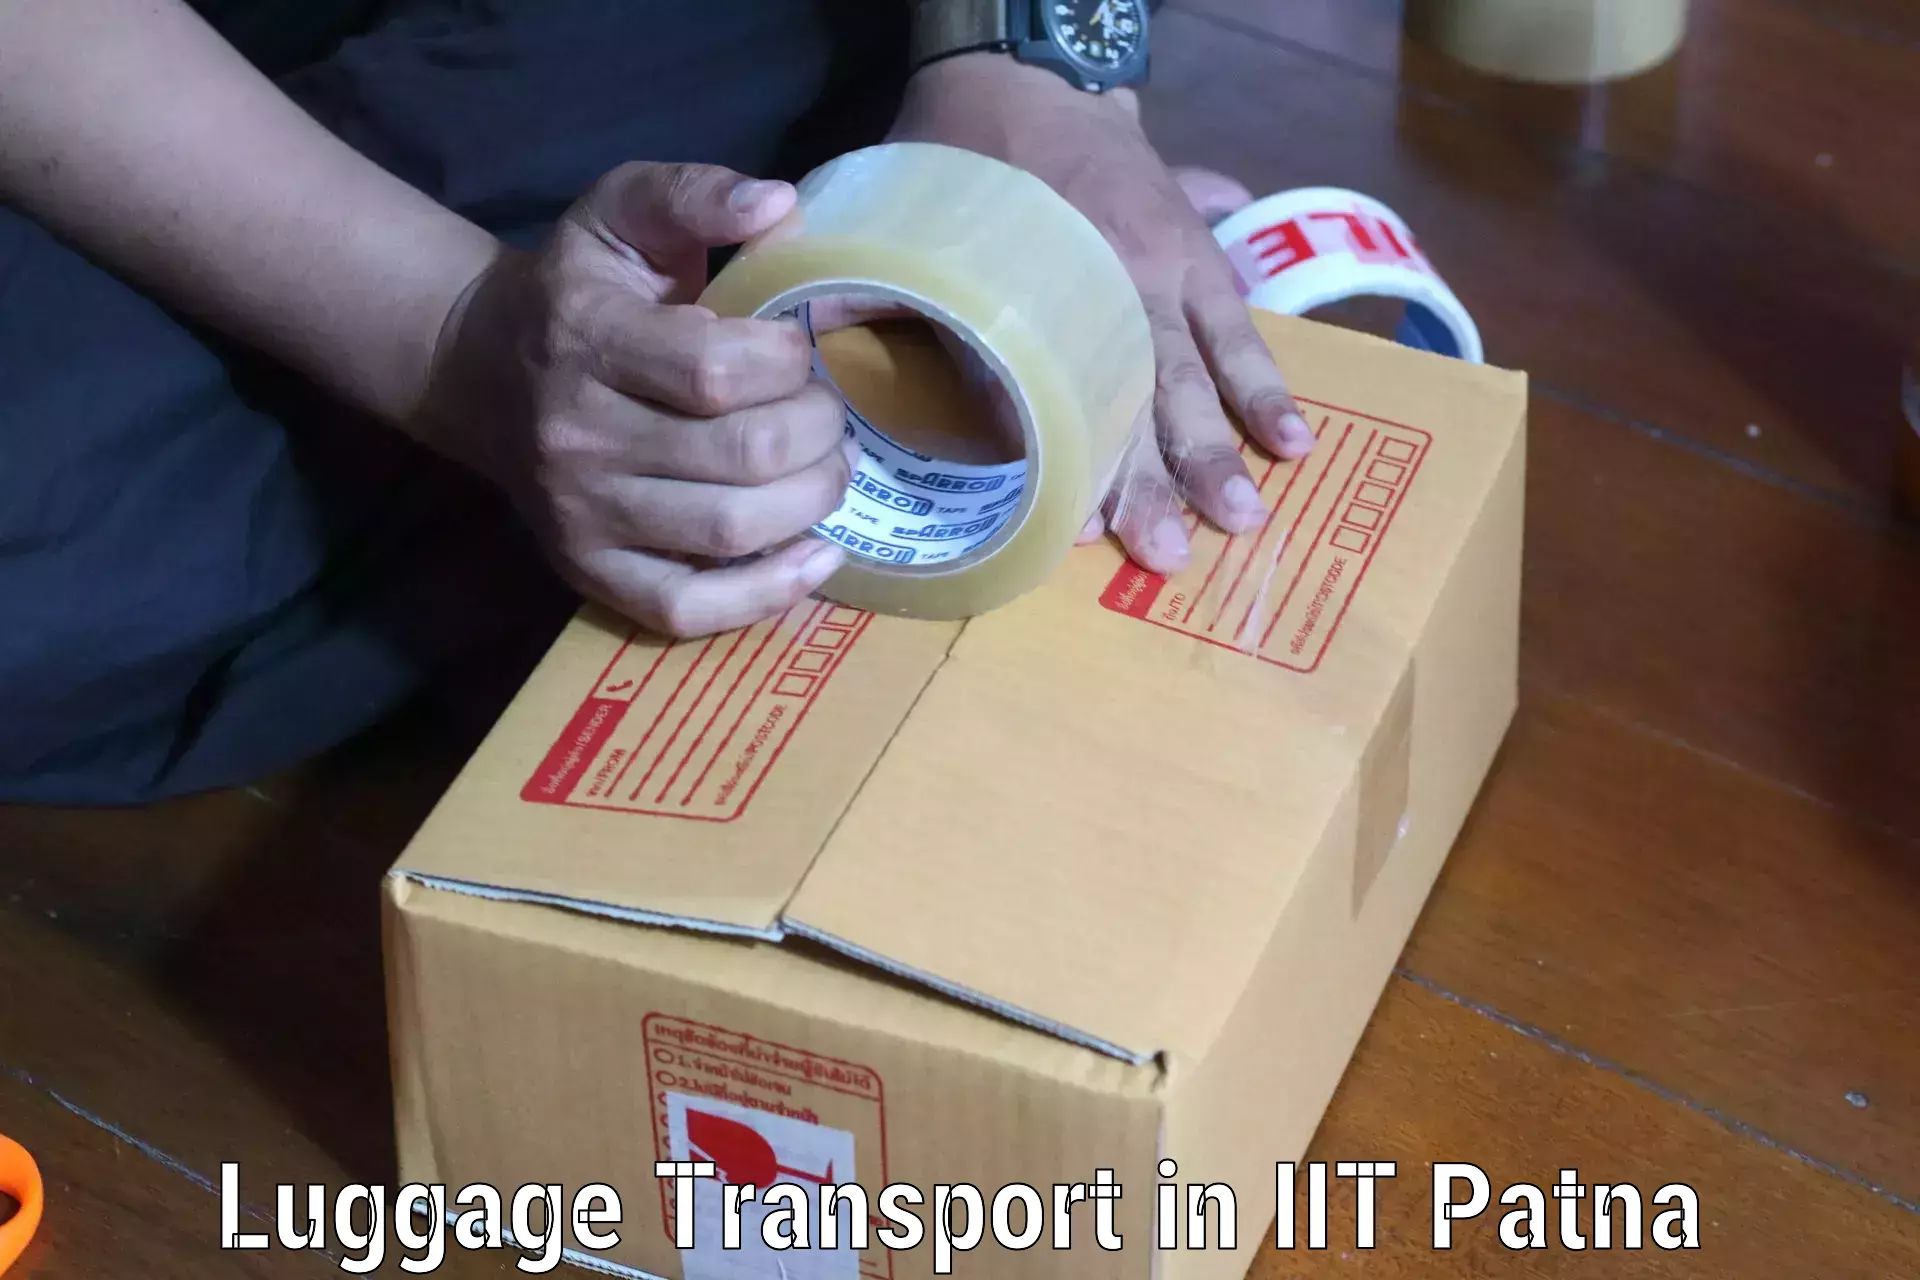 Luggage transport consulting in IIT Patna